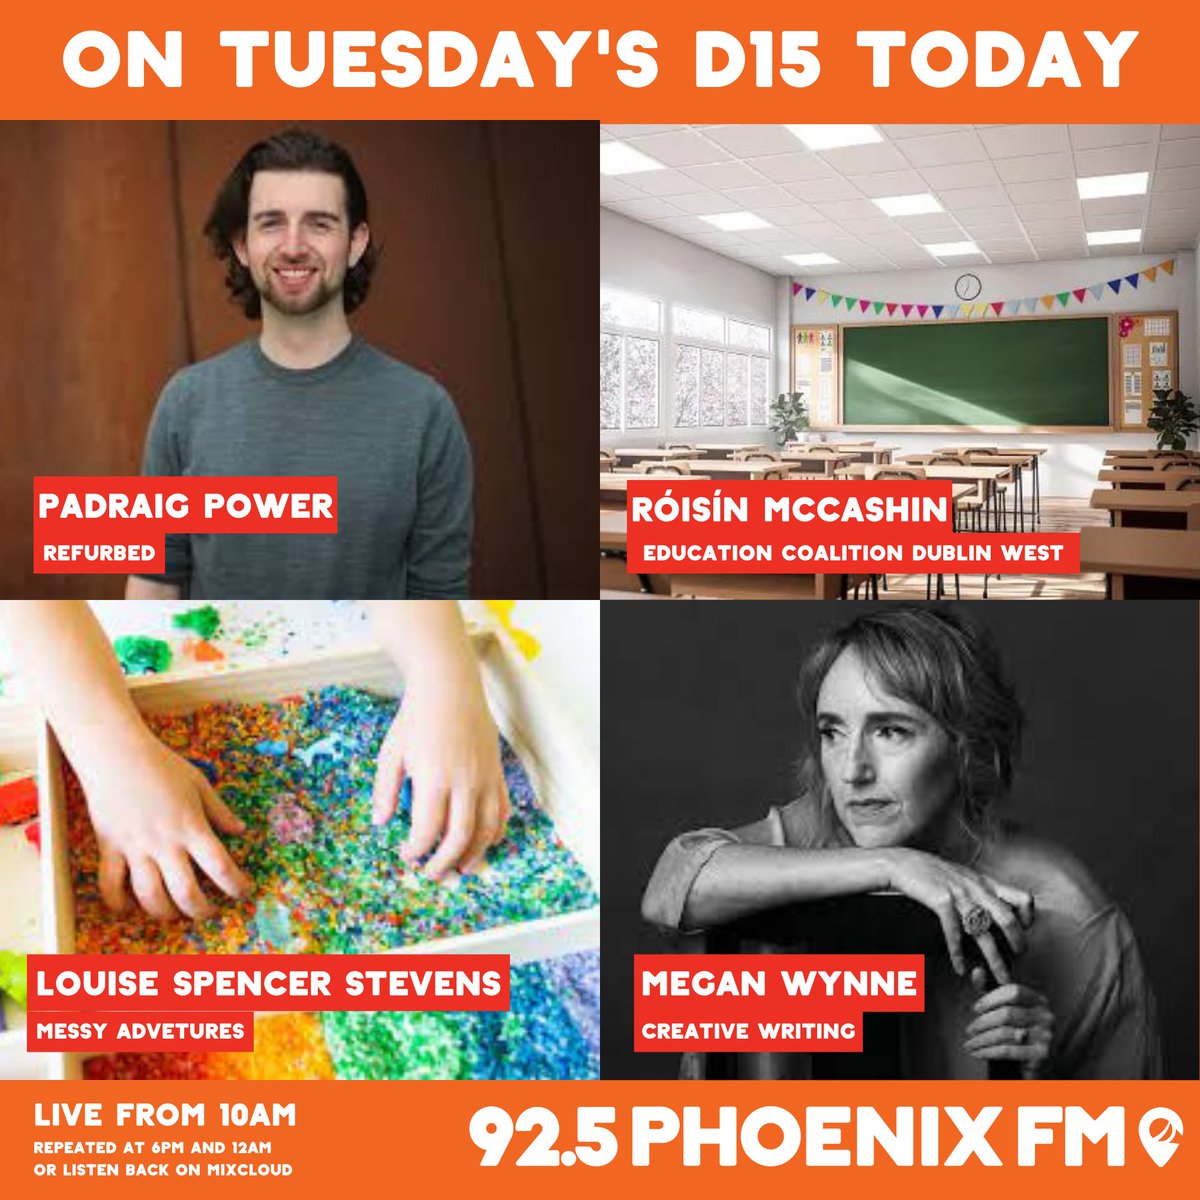 On Tuesday's D15 Today:

Padraig Power, @refurbed 
Róisín McCashin, @EducationCoalitionDublinWest
Louise Spencer Stevens, @VWard1988 
@MeganWynneWrite Creative Writing

Listen live from 10am on 92.5 FM and online at live.phoenixfm.ie!